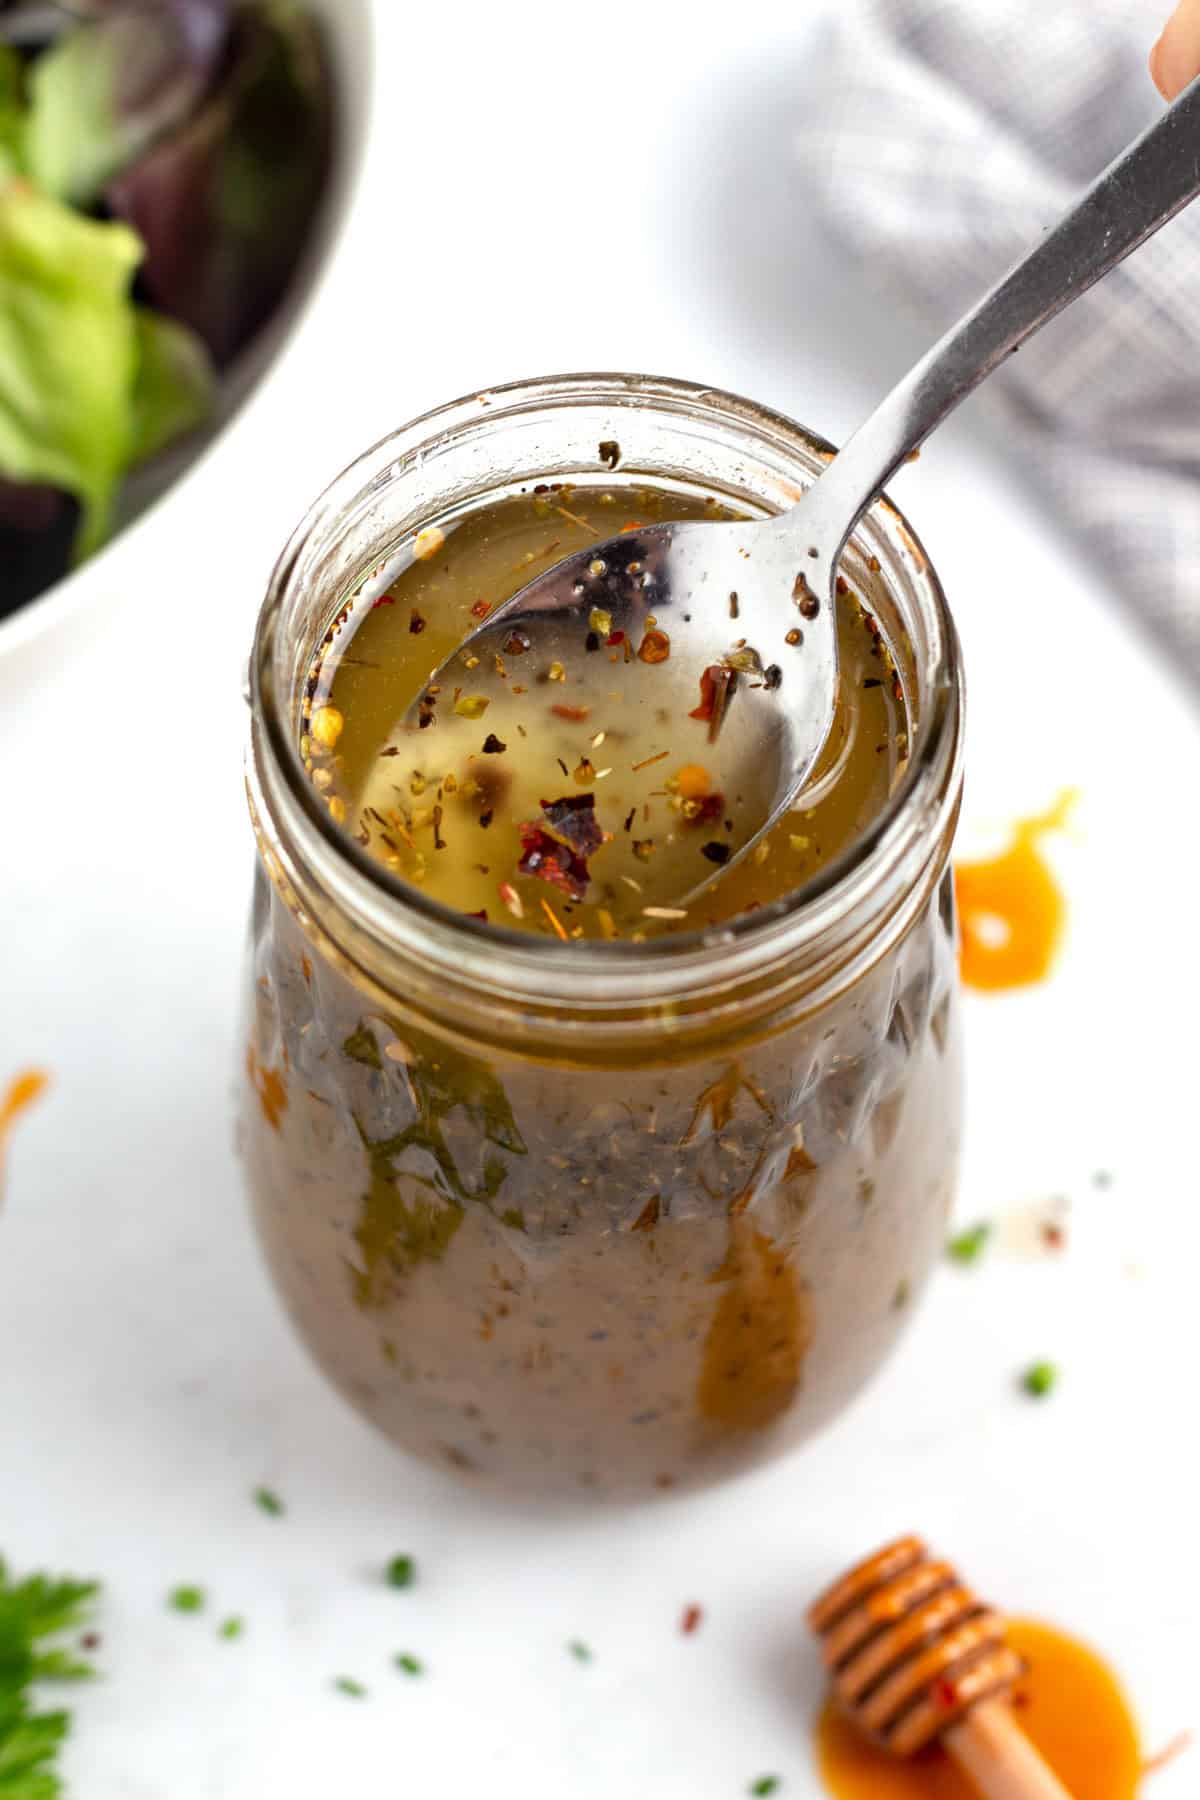 Jar of vinaigrette with a spoon being lifted out of it and a bowl of green lettuce in the background.